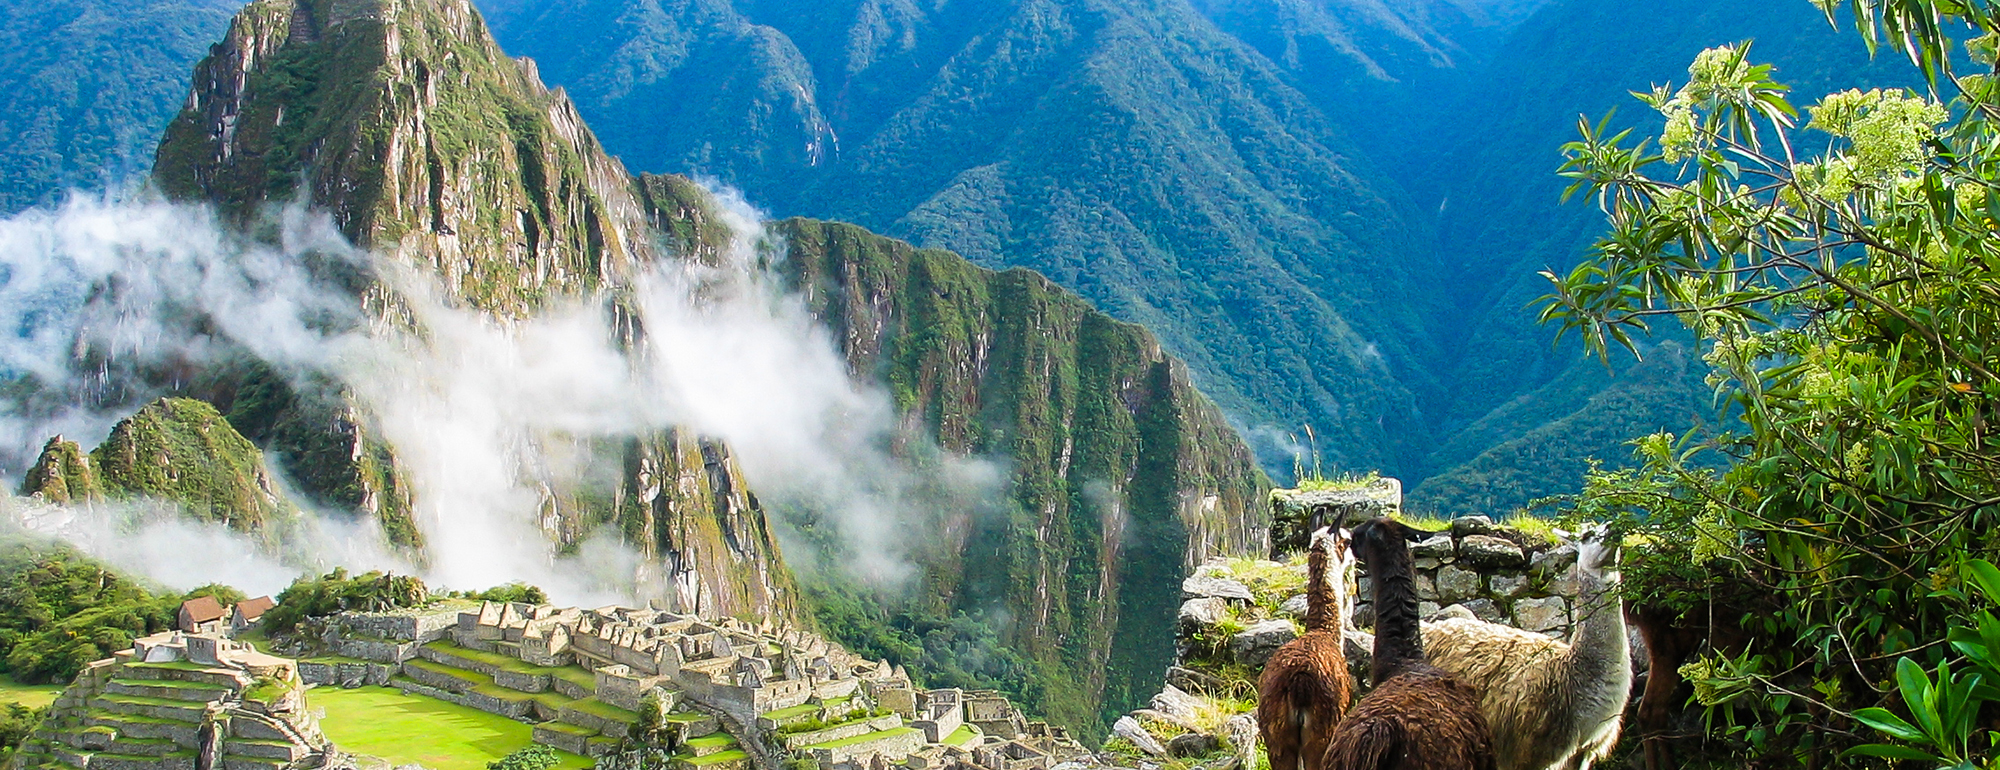 Llamas watch over Machu Picchu covered in mist